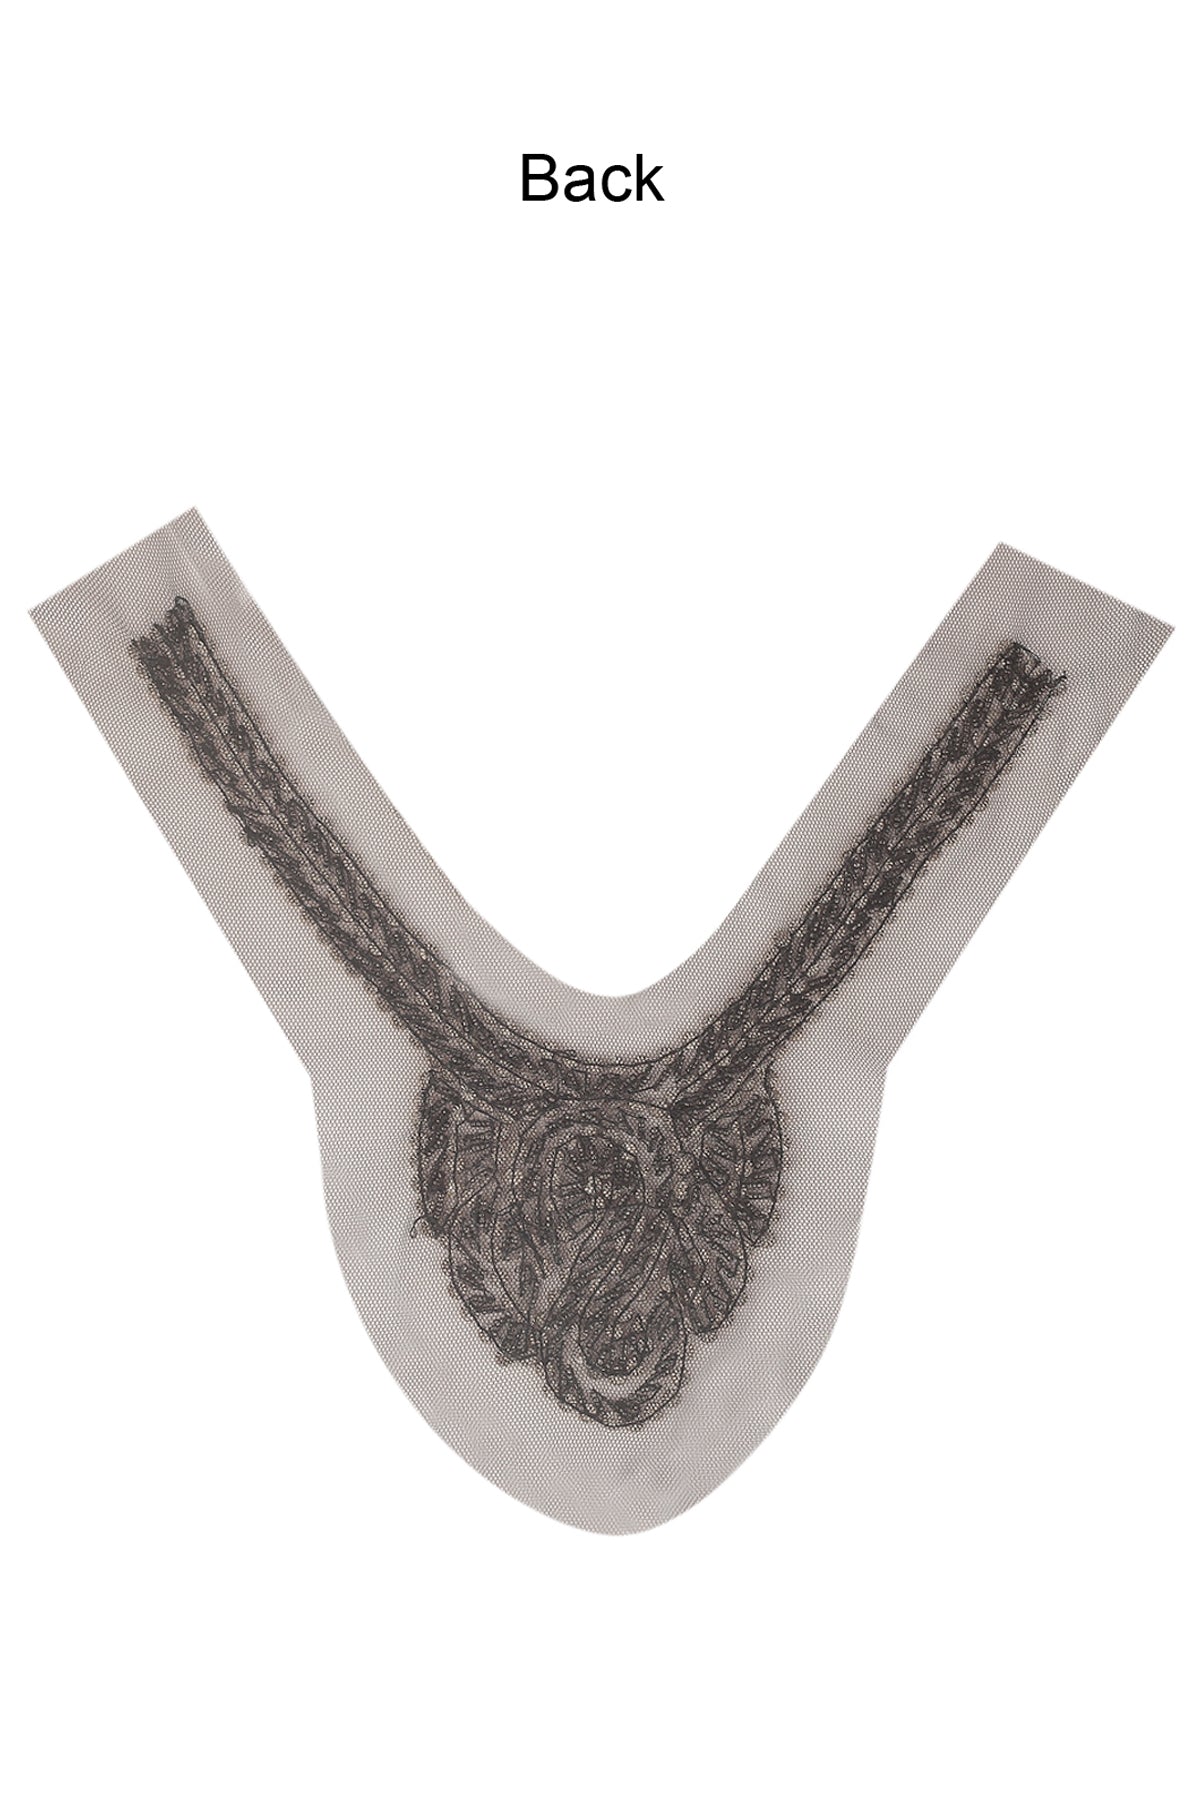 Fancy Beaded Neck Collar Statement Neck Patch